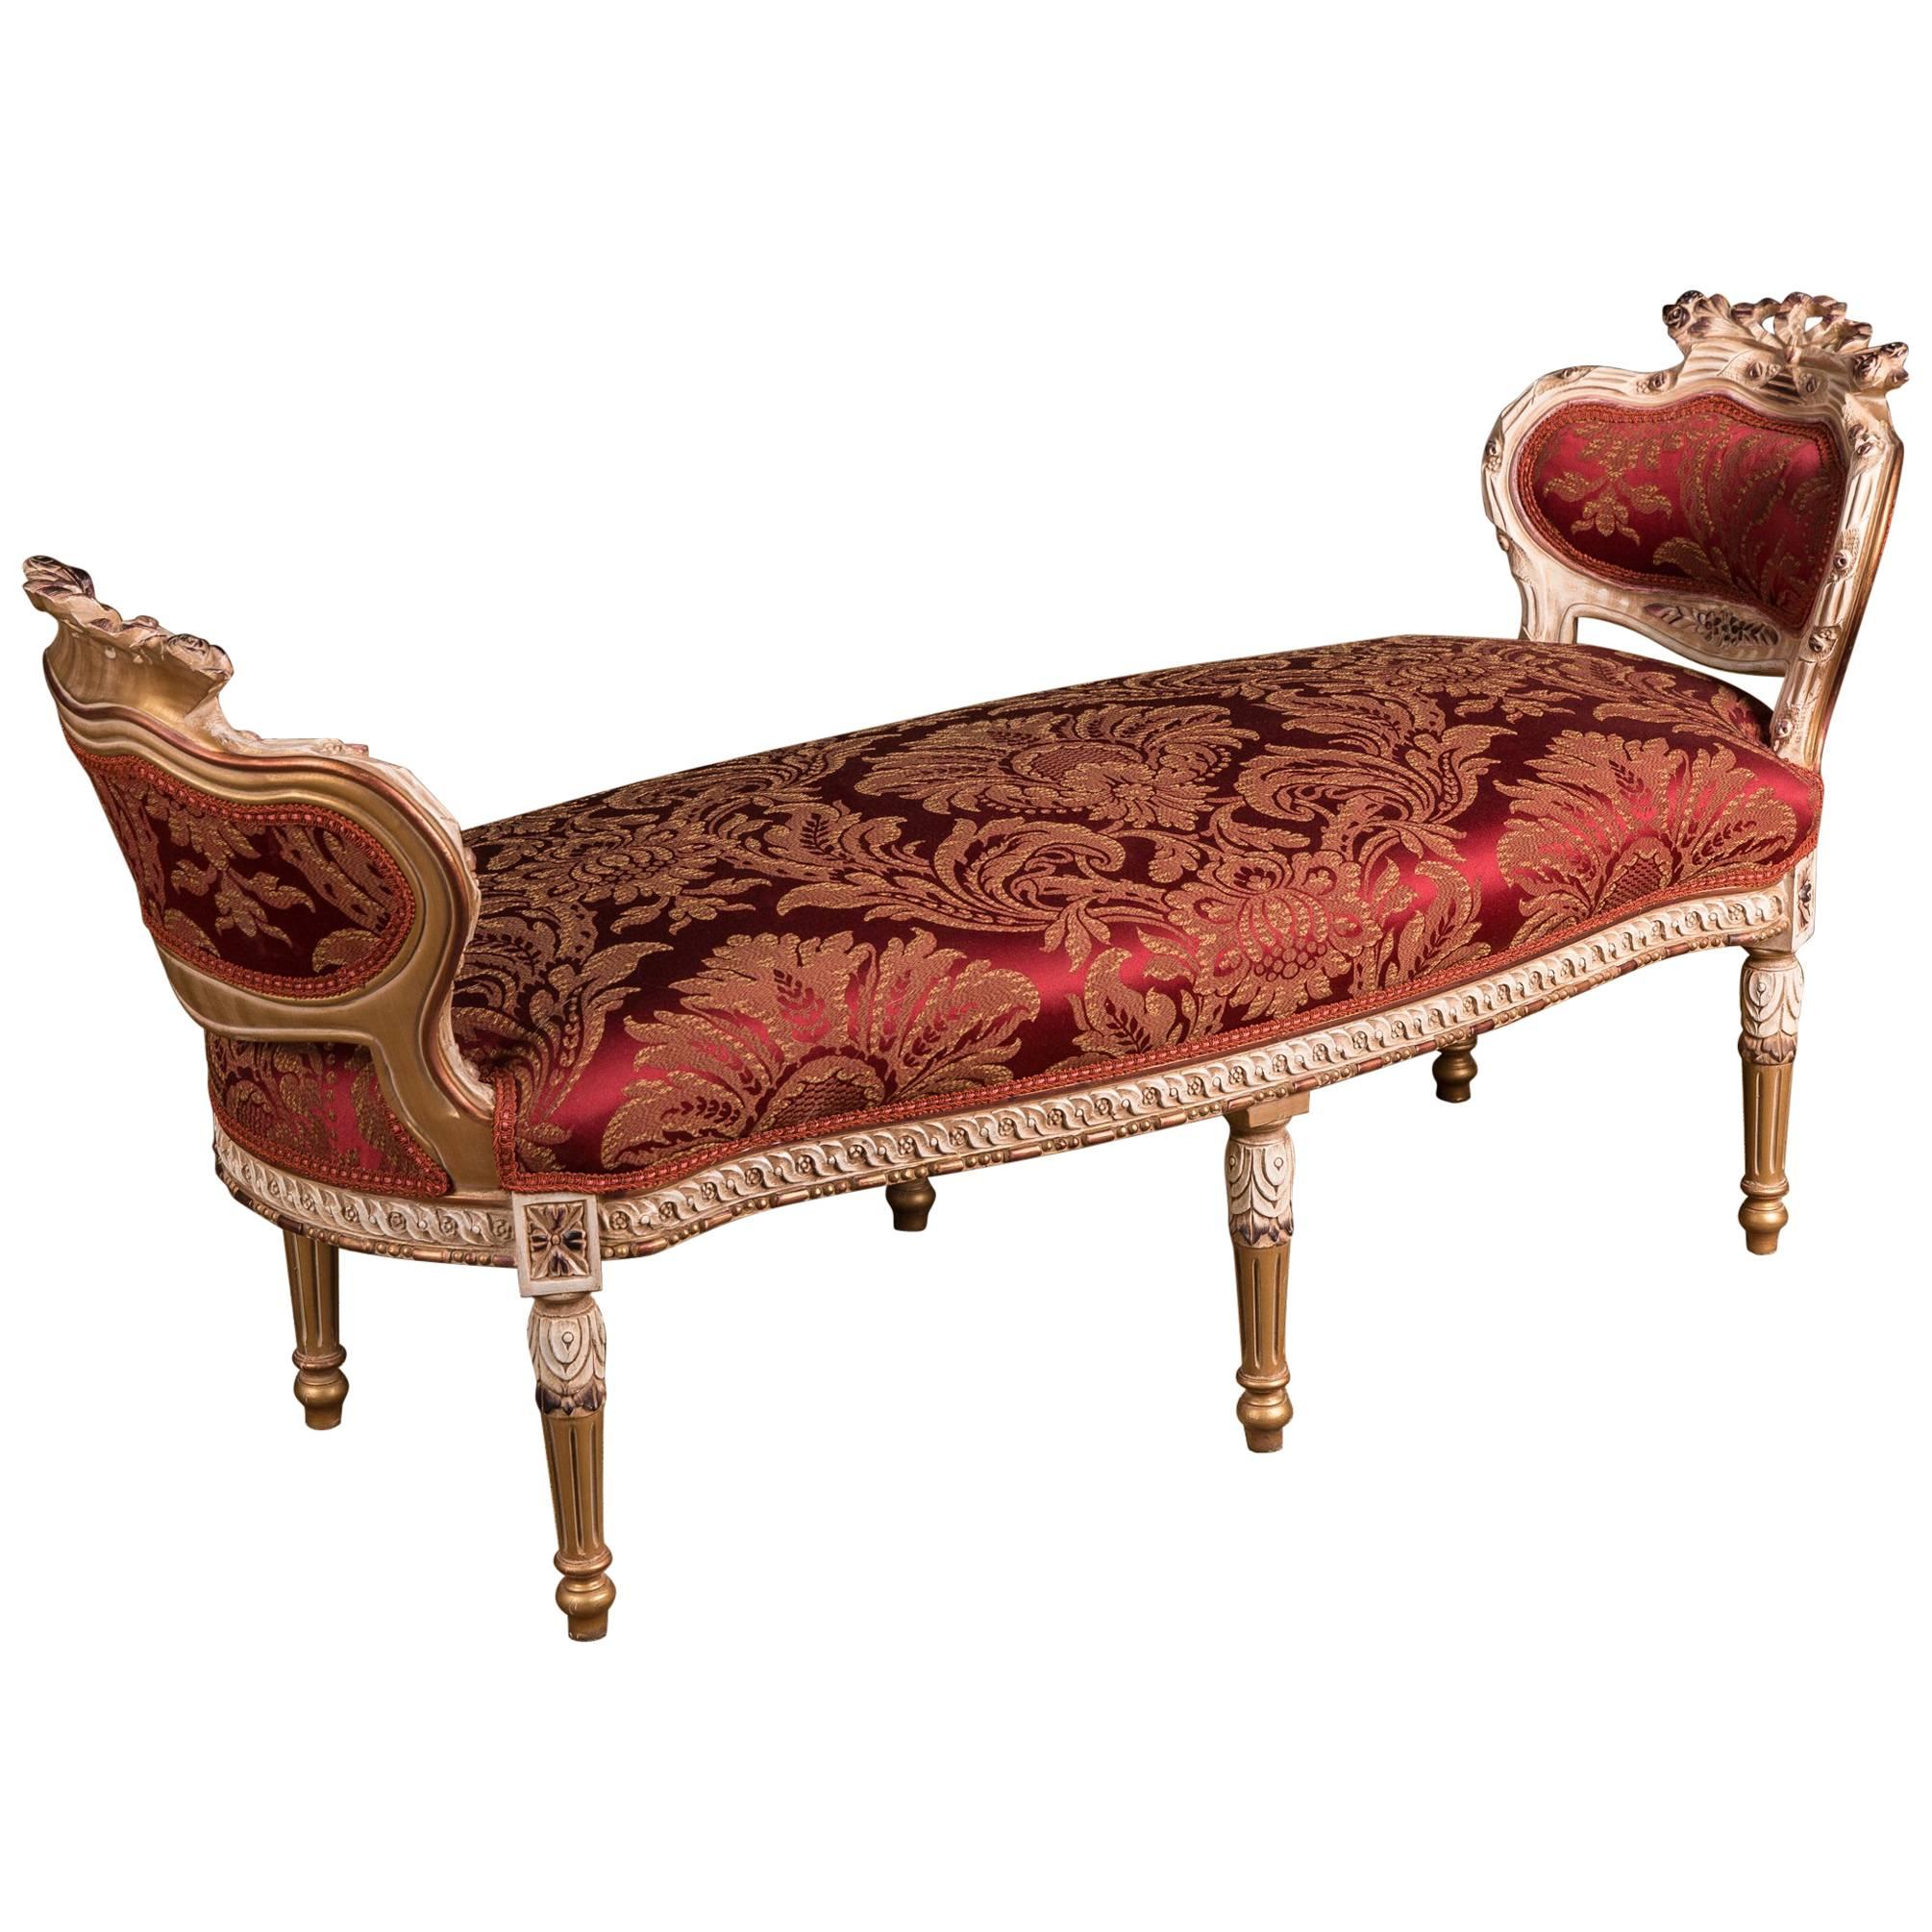 High Quality French Chaise Longue in Louis Quinze Style